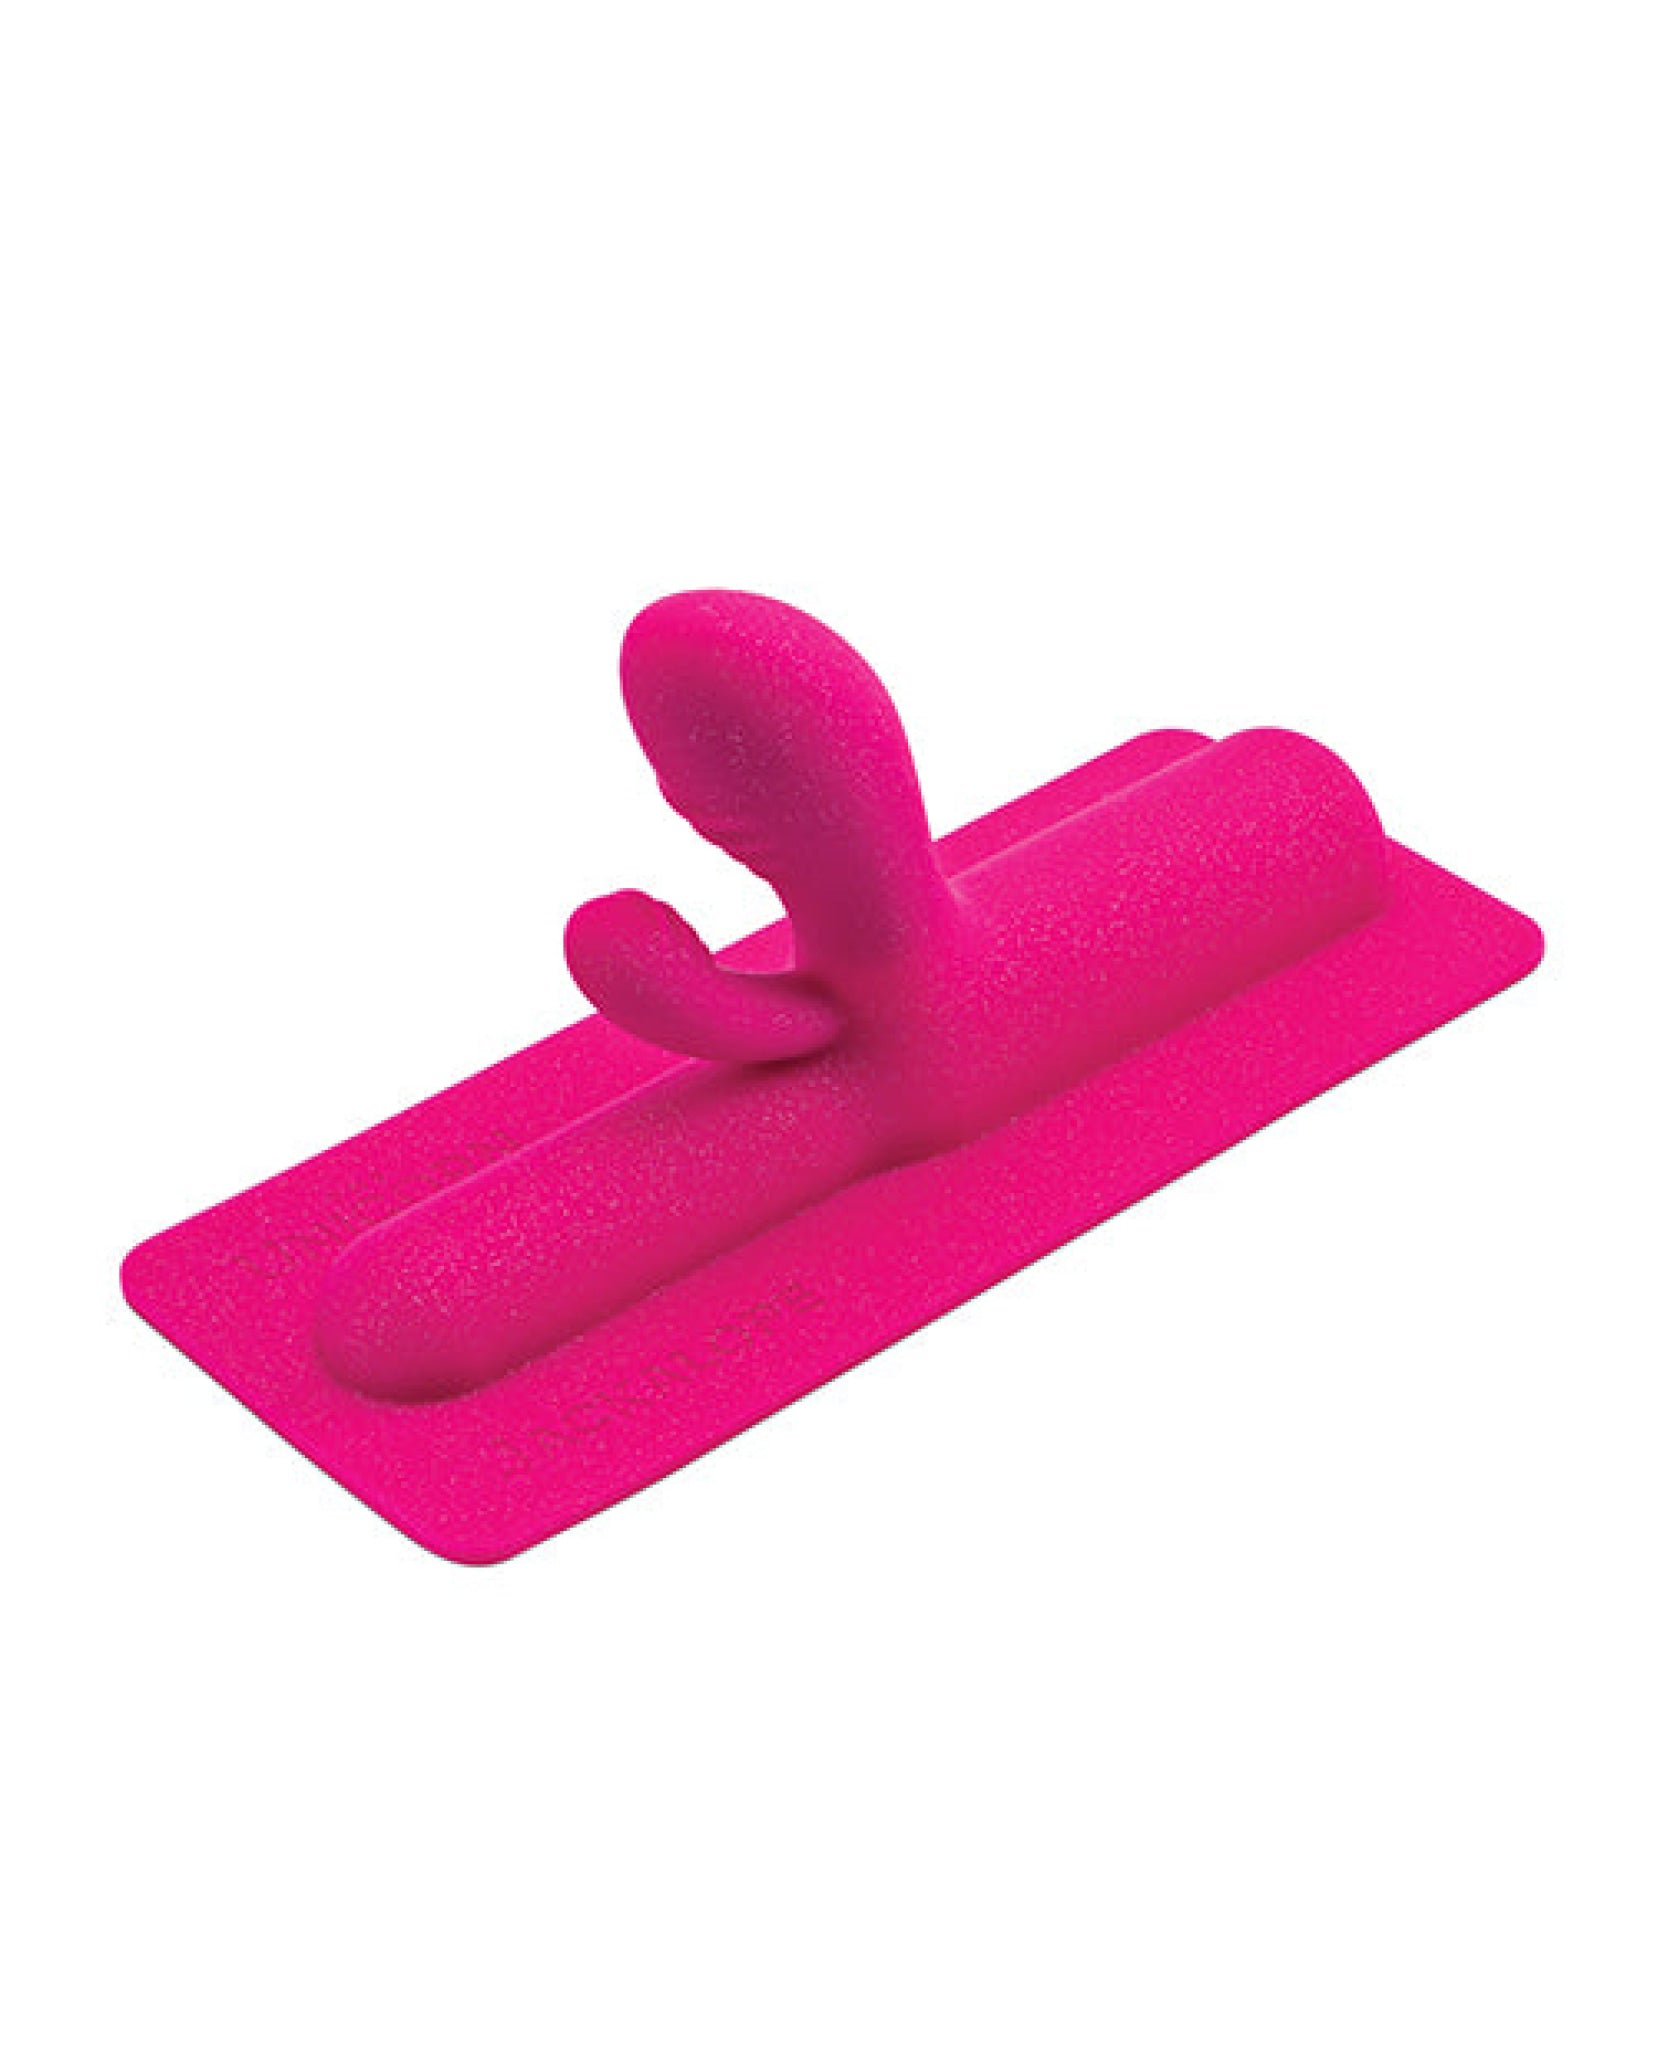 The Cowgirl Unicorn Jackalope Silicone Attachment - Pink The Cowgirl